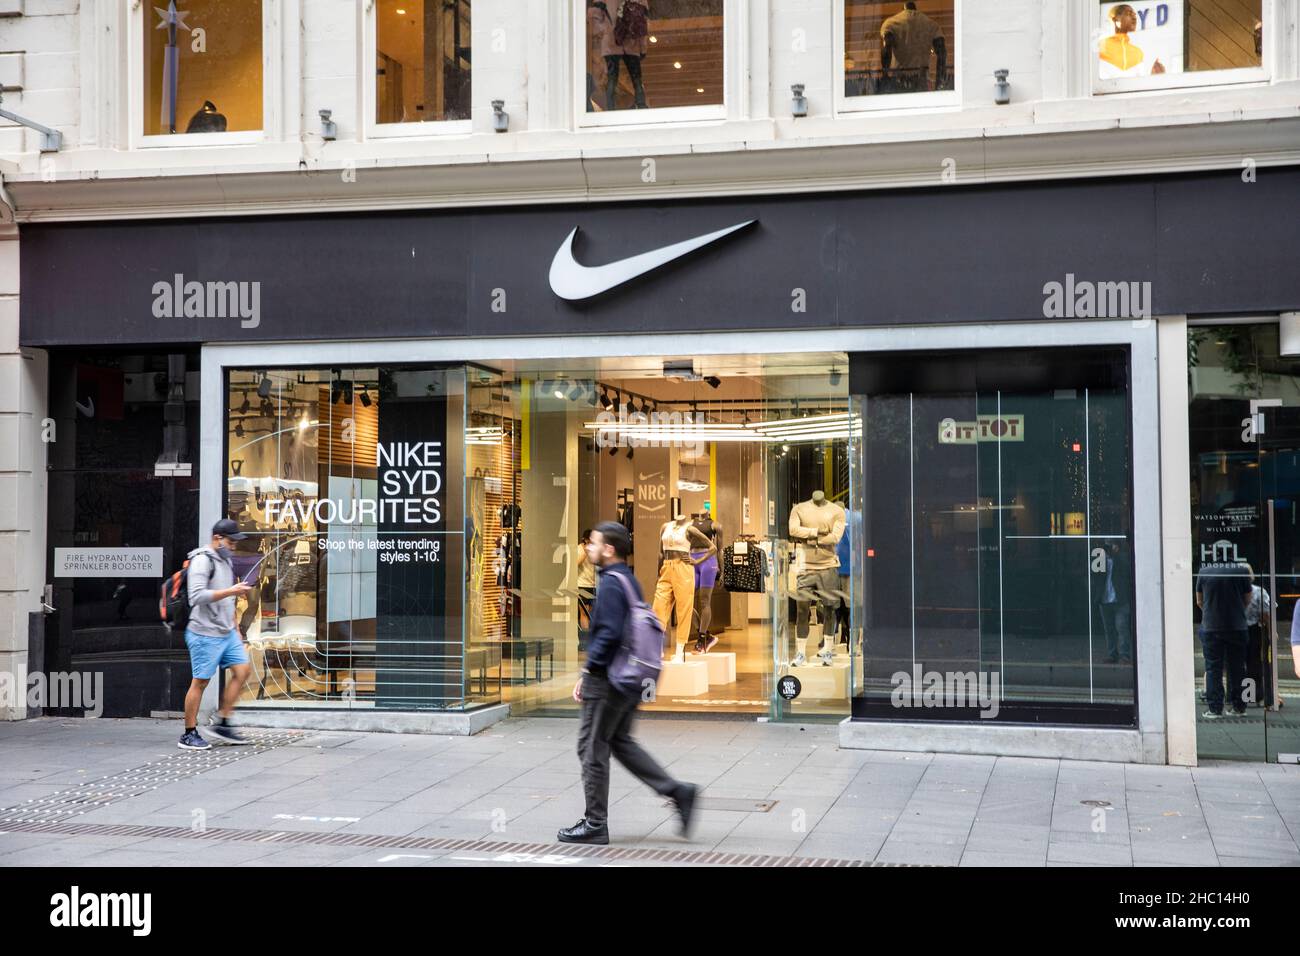 Nike Store High Resolution Stock Photography and Images - Alamy